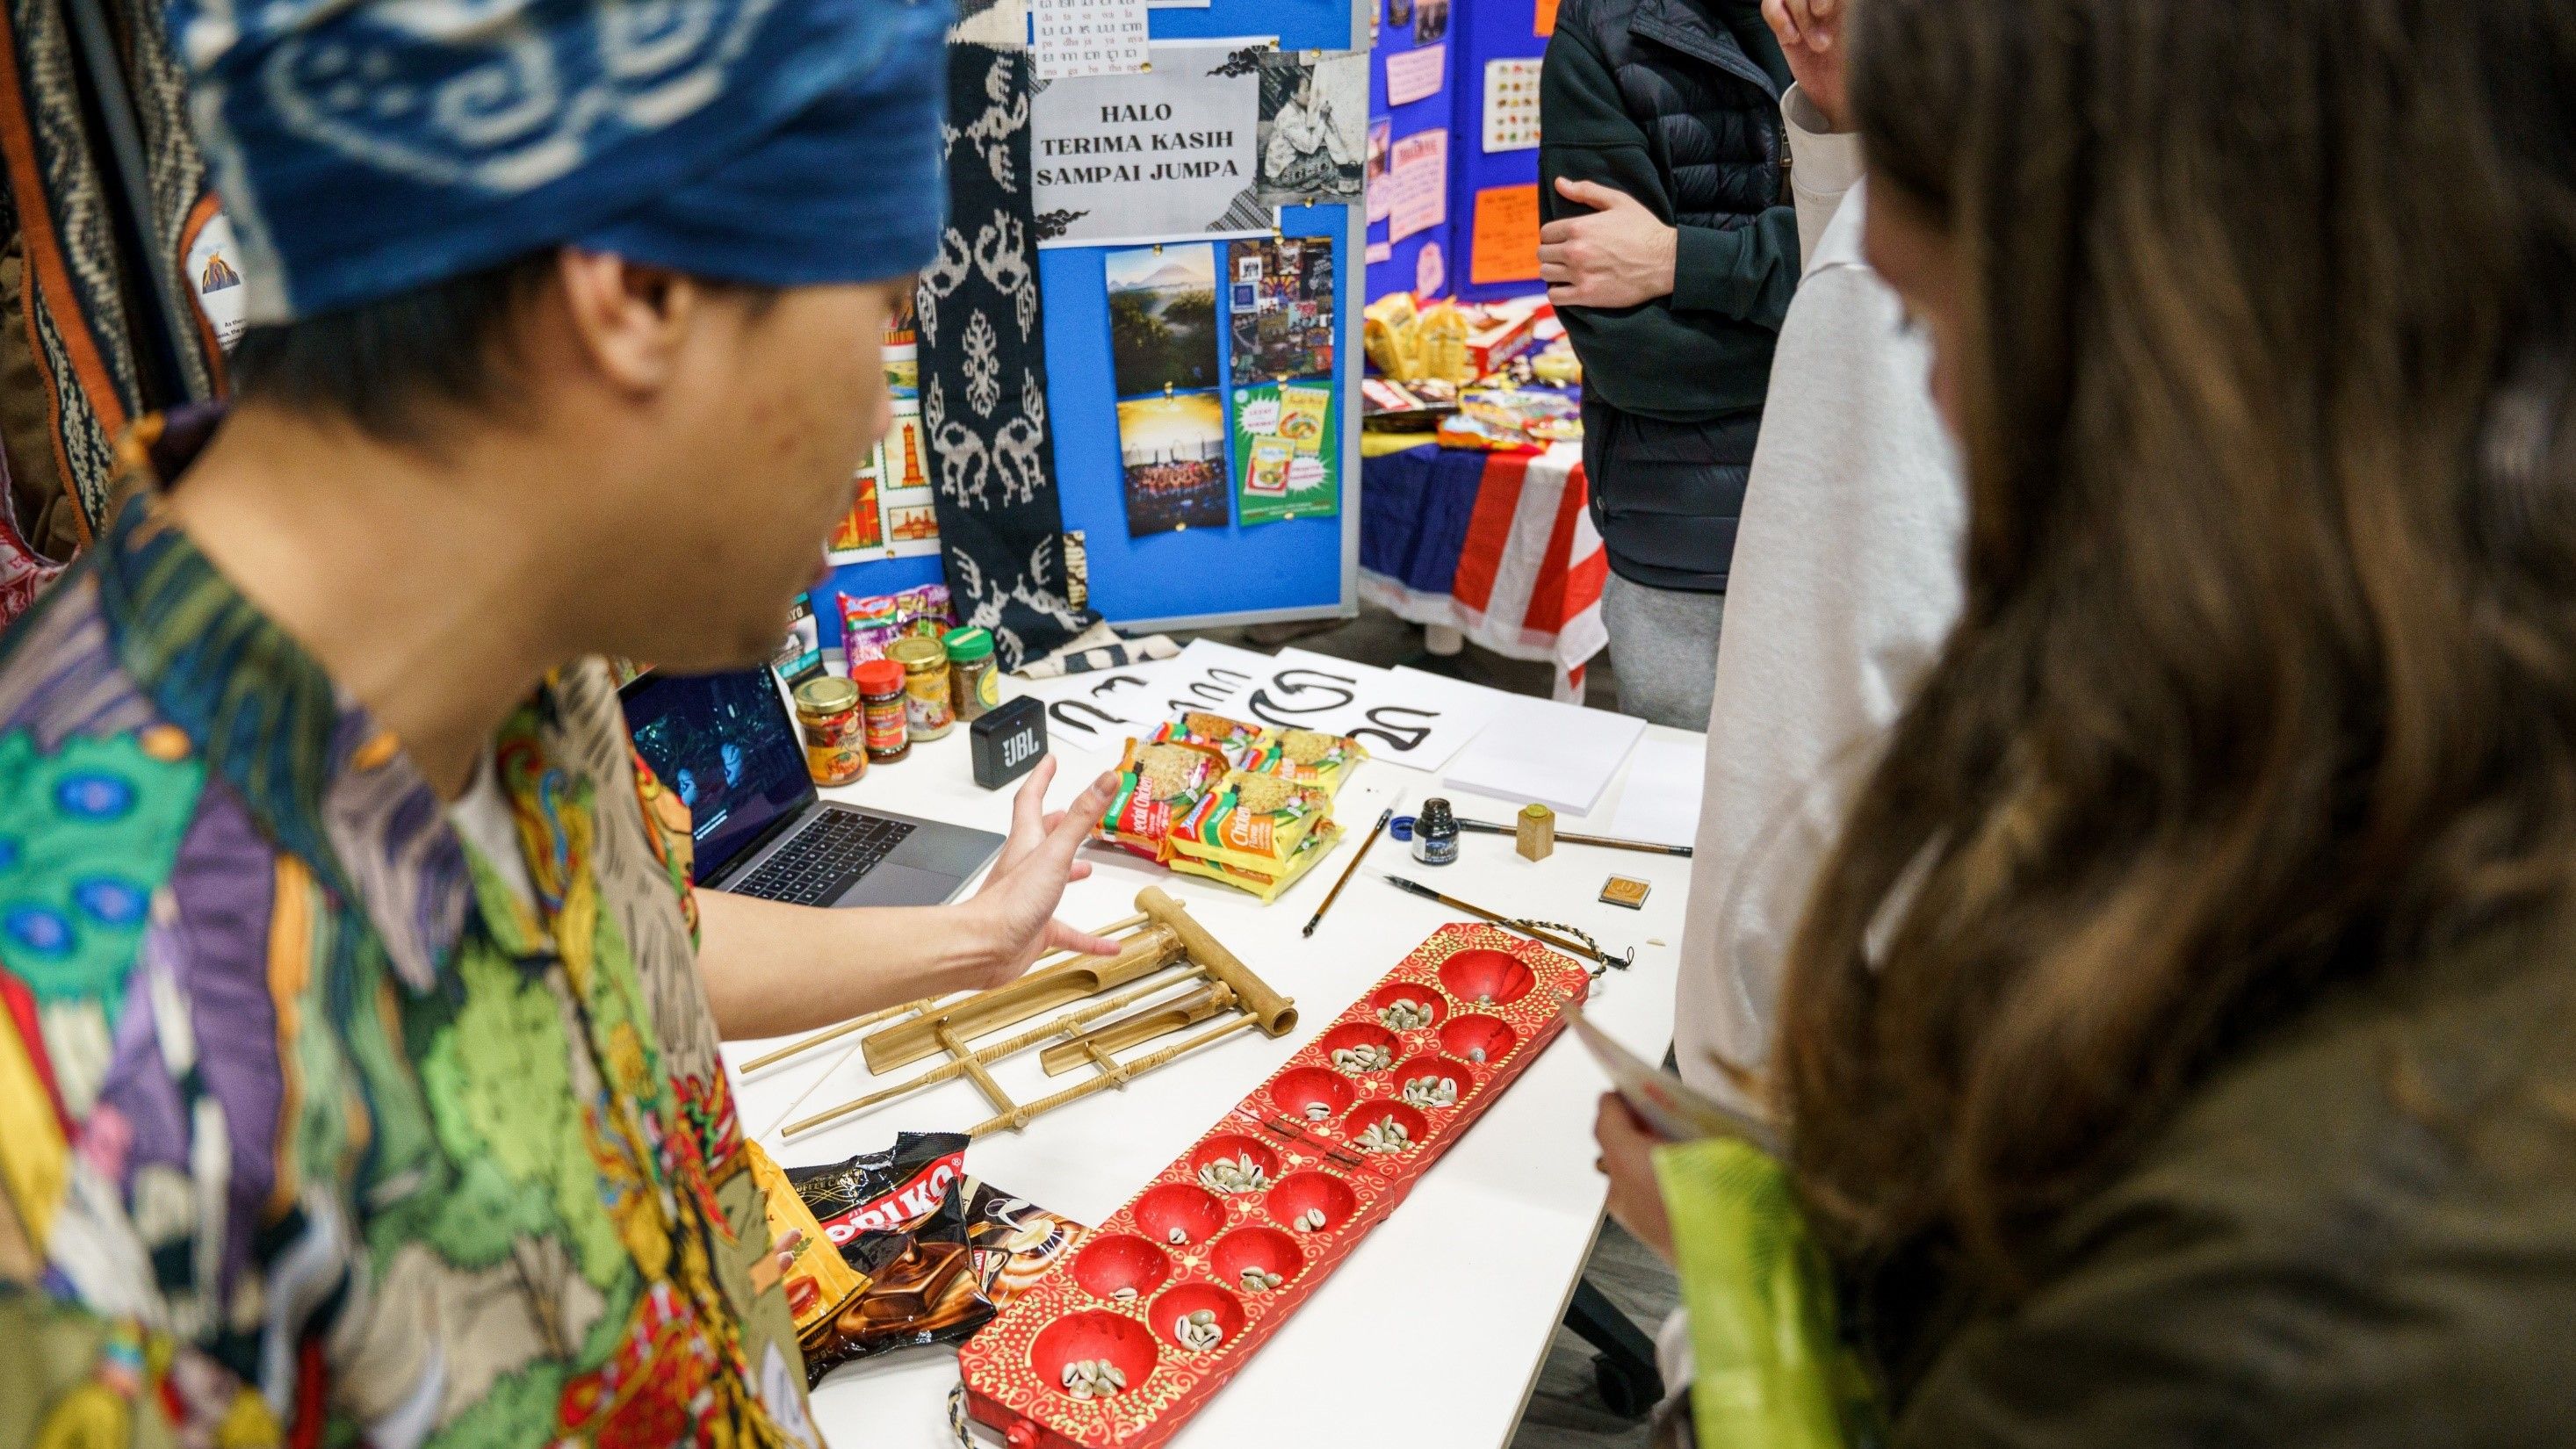 Students learning about Indonesia, one of many countries represented by a stall at World Fest